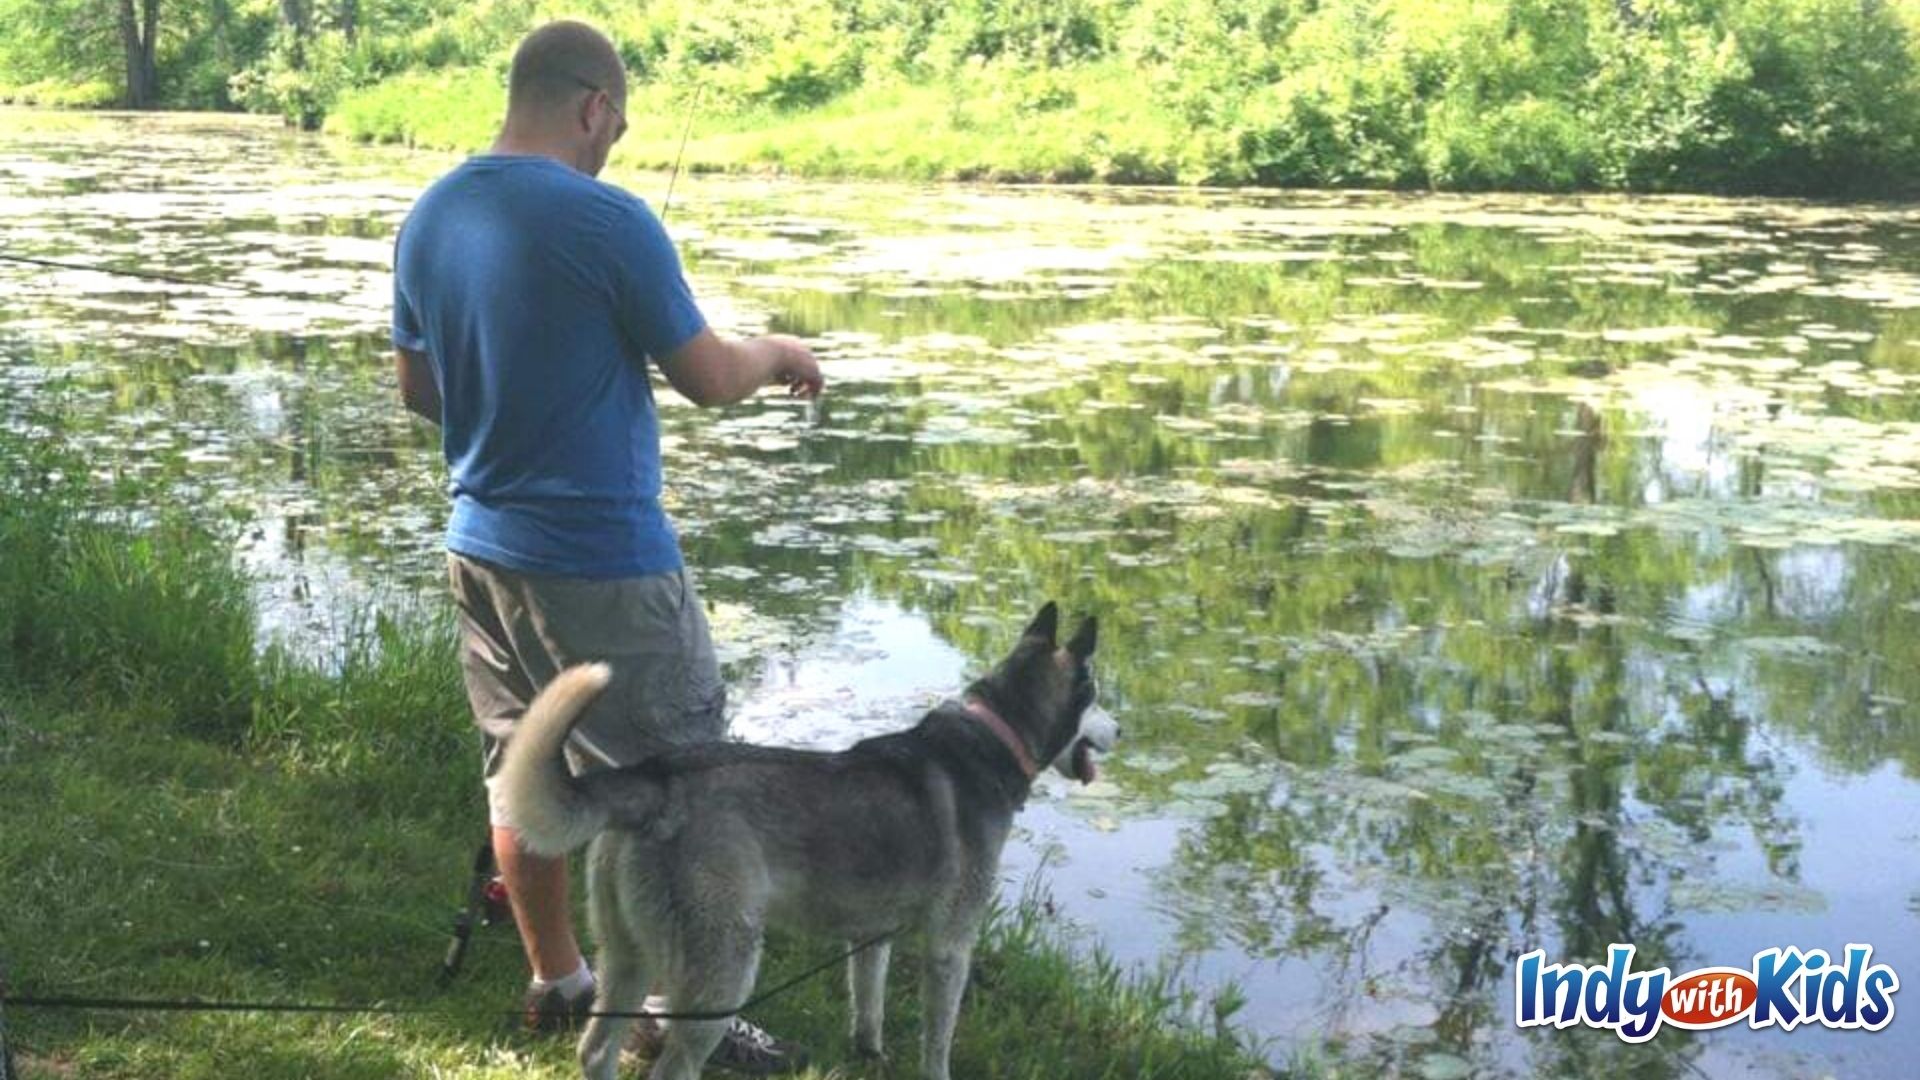 A man and a dog take in a peaceful scene near a pond at Fort Harrison State Park.